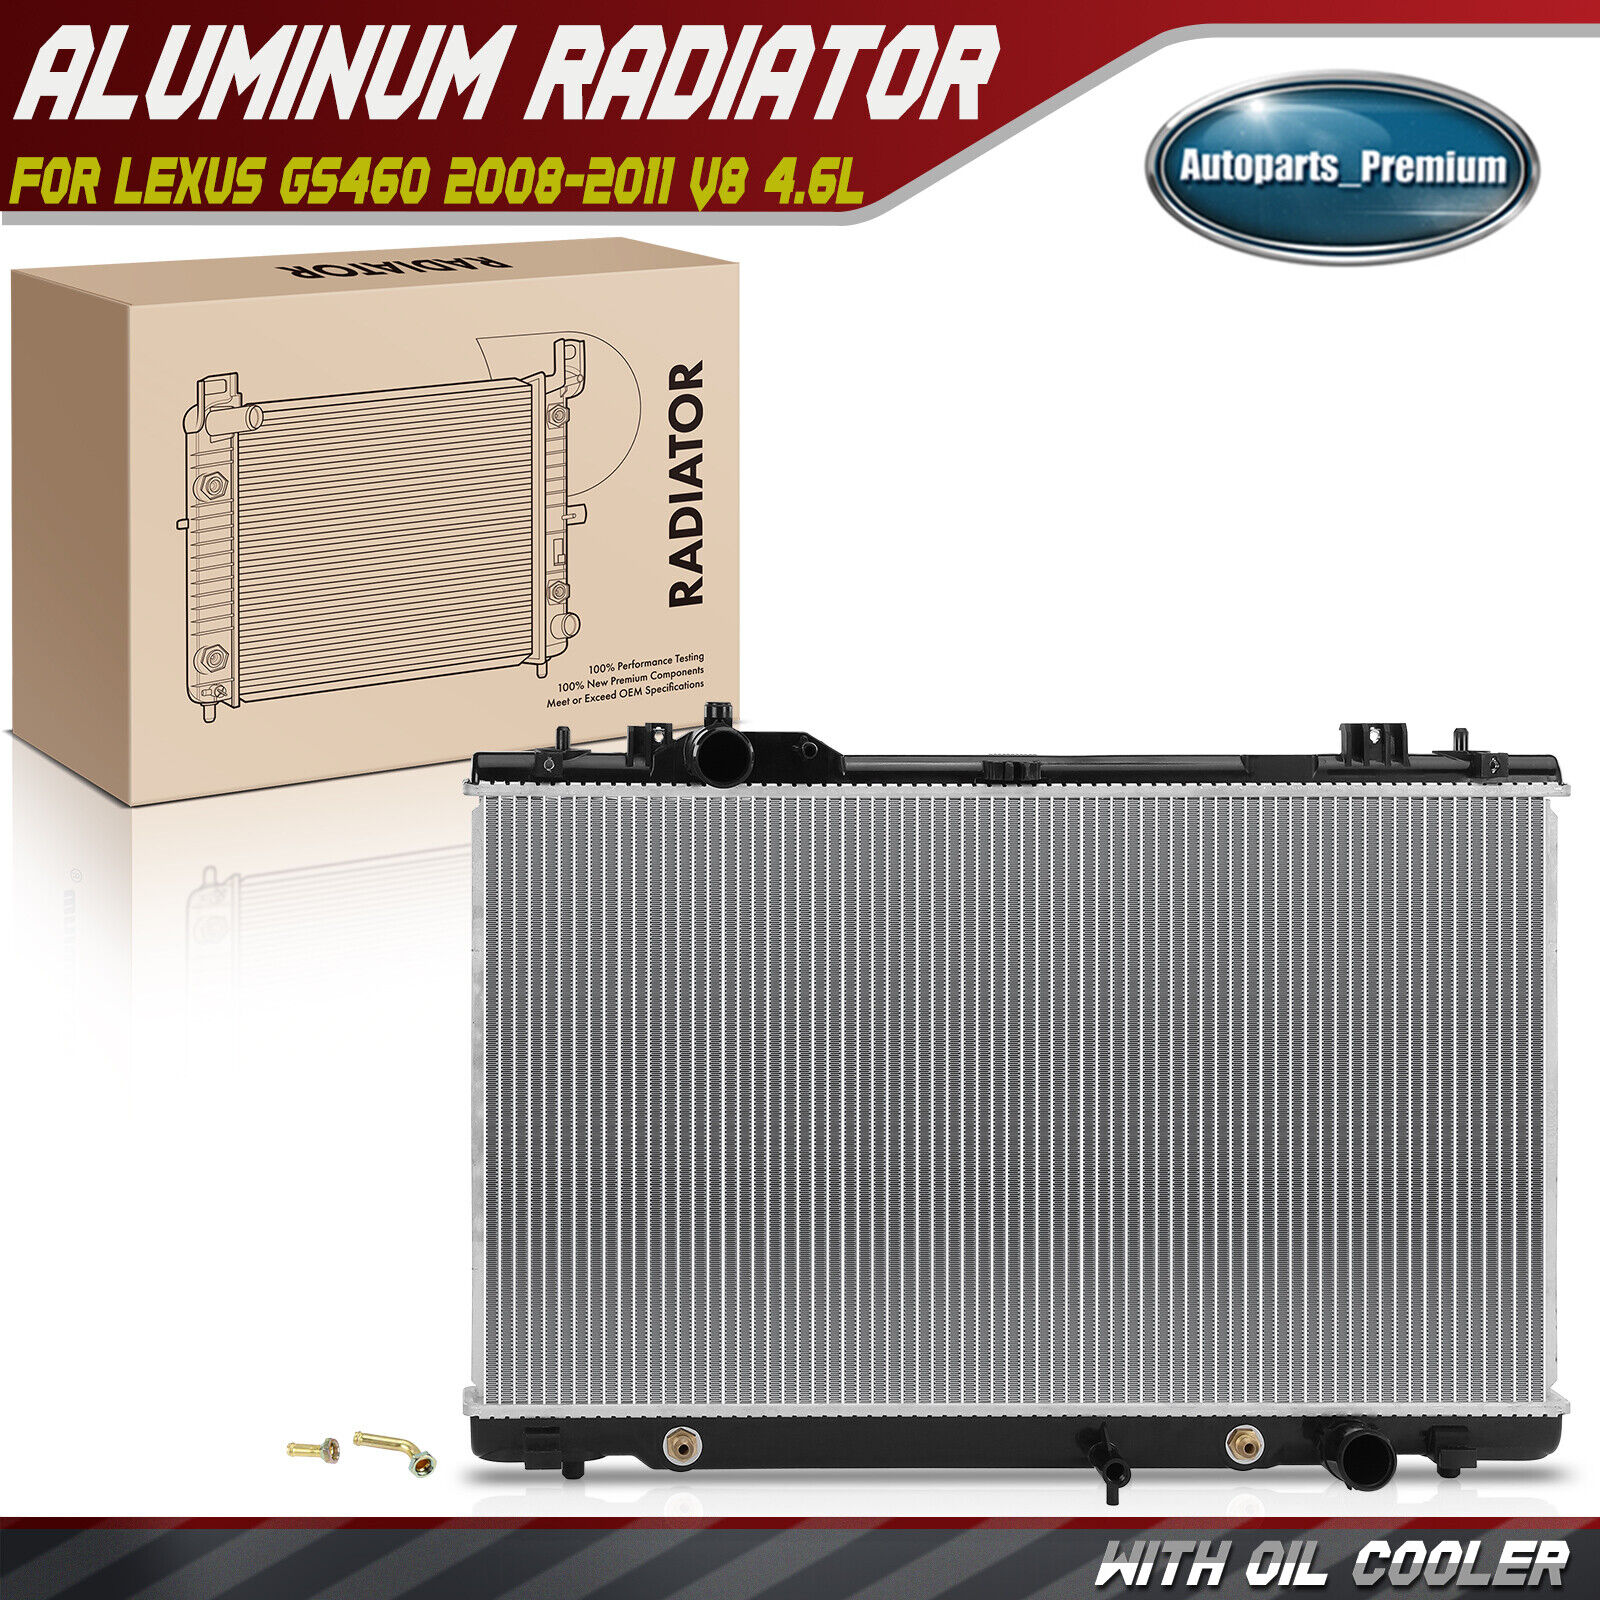 Radiator w/ Transmission Oil Cooler for Lexus GS460 2008-2011 V8 4.6L Automatic